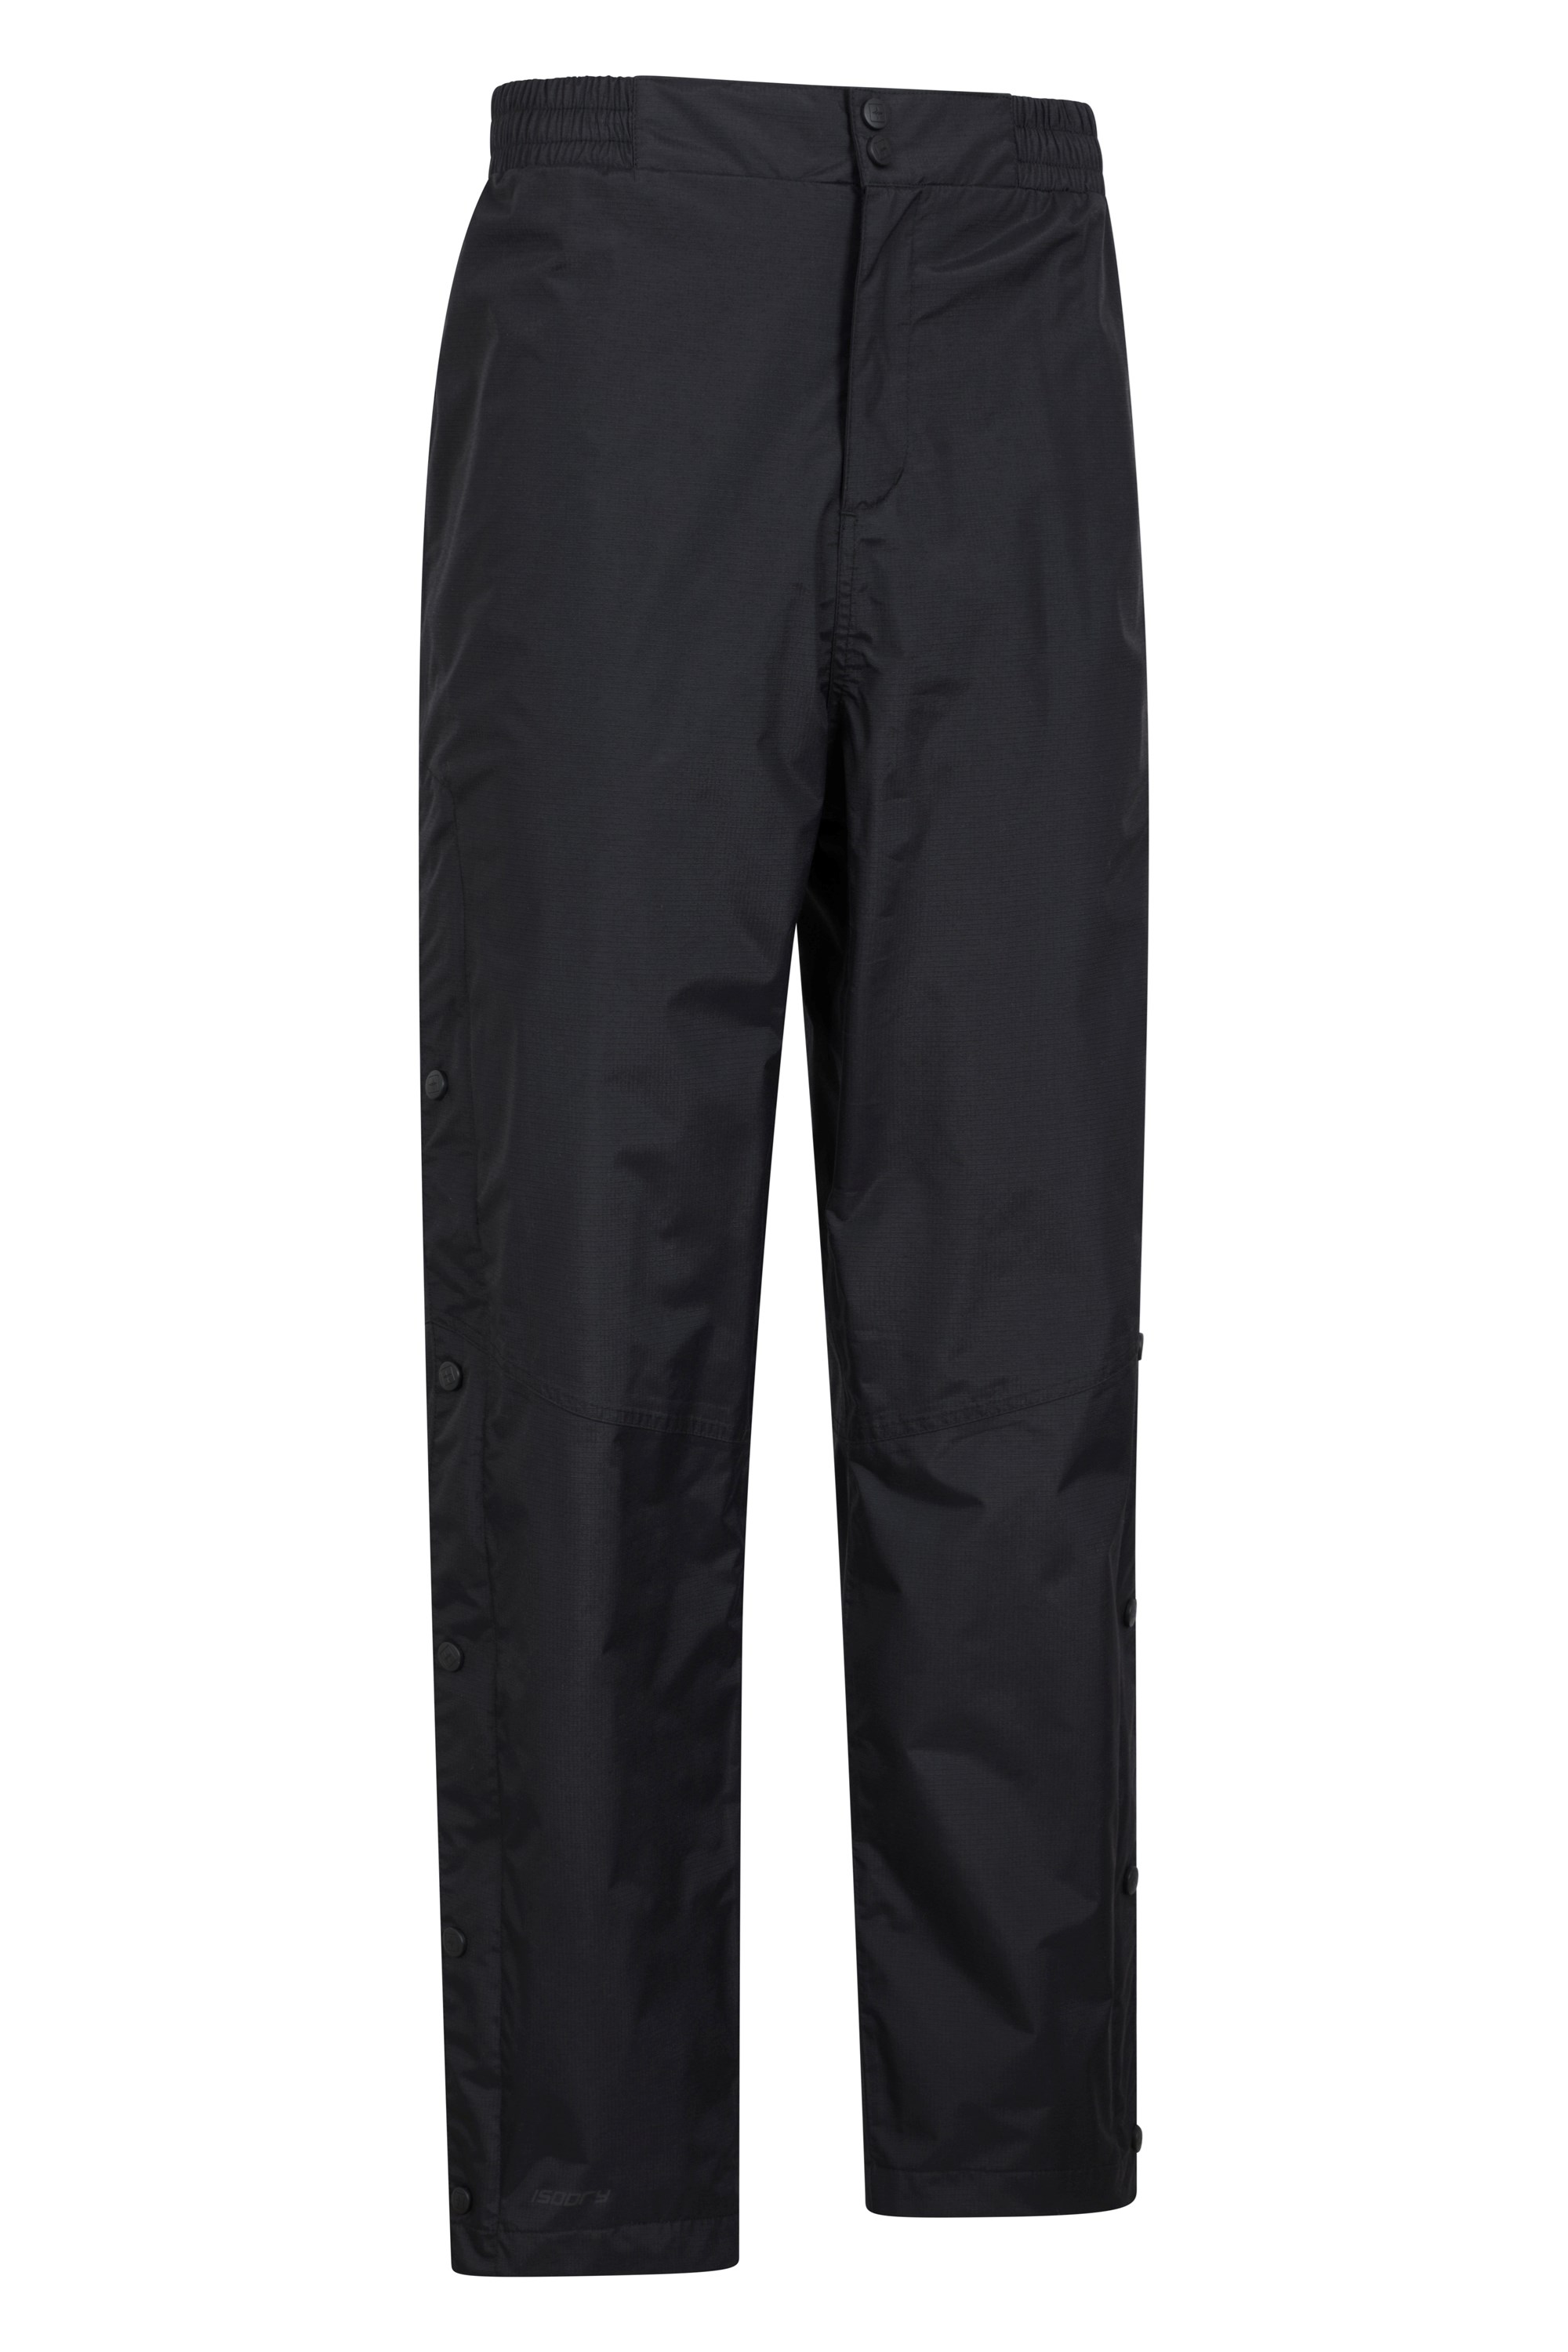 Nash Waterproof Trousers (Children's Sizes) - Fishing / Camping Trousers –  Anglers World